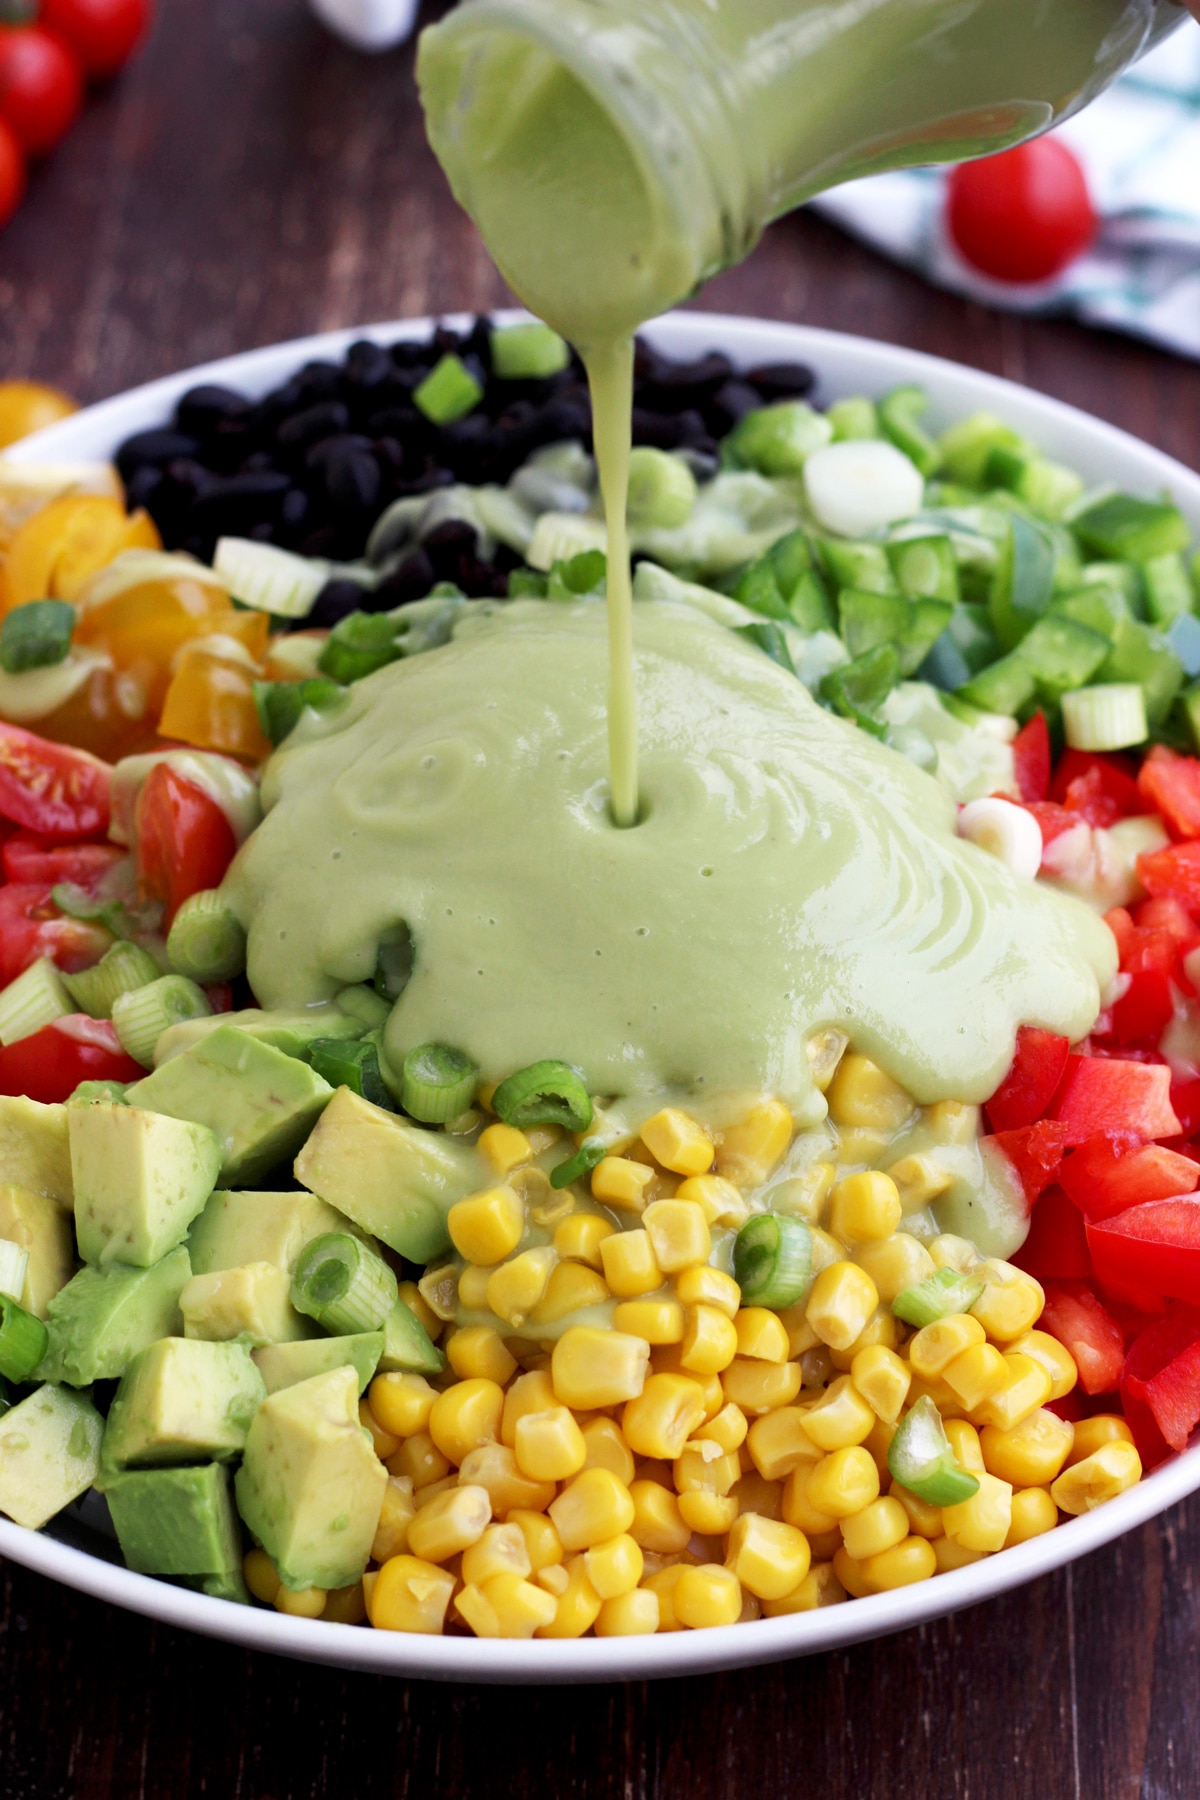 Easy And Delicious Gluten Free Recipe Of A Vegan Mexican - Salad Recipes - HD Wallpaper 